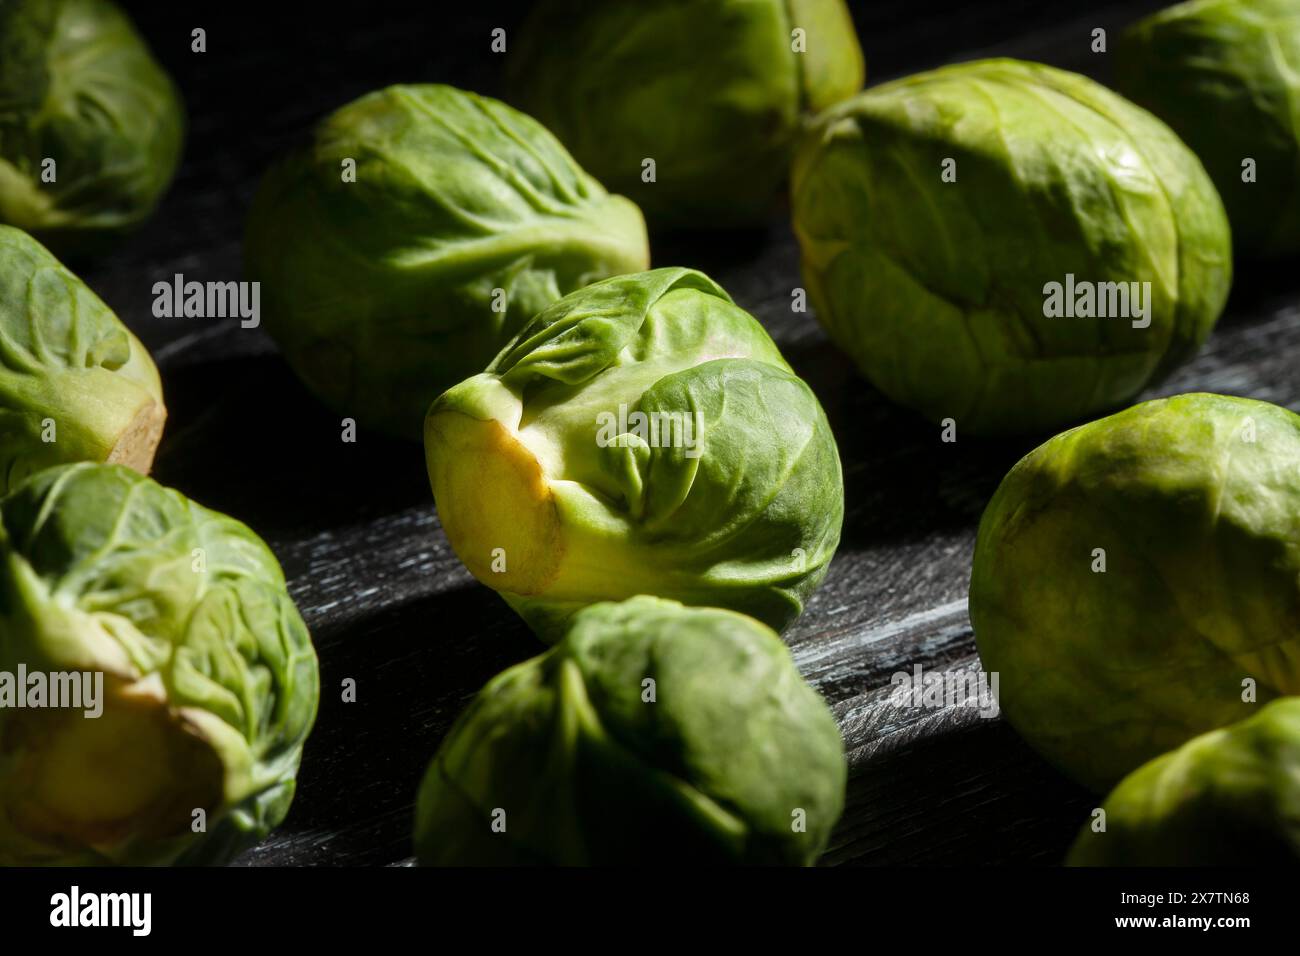 brussels sprouts on black wood background Stock Photo